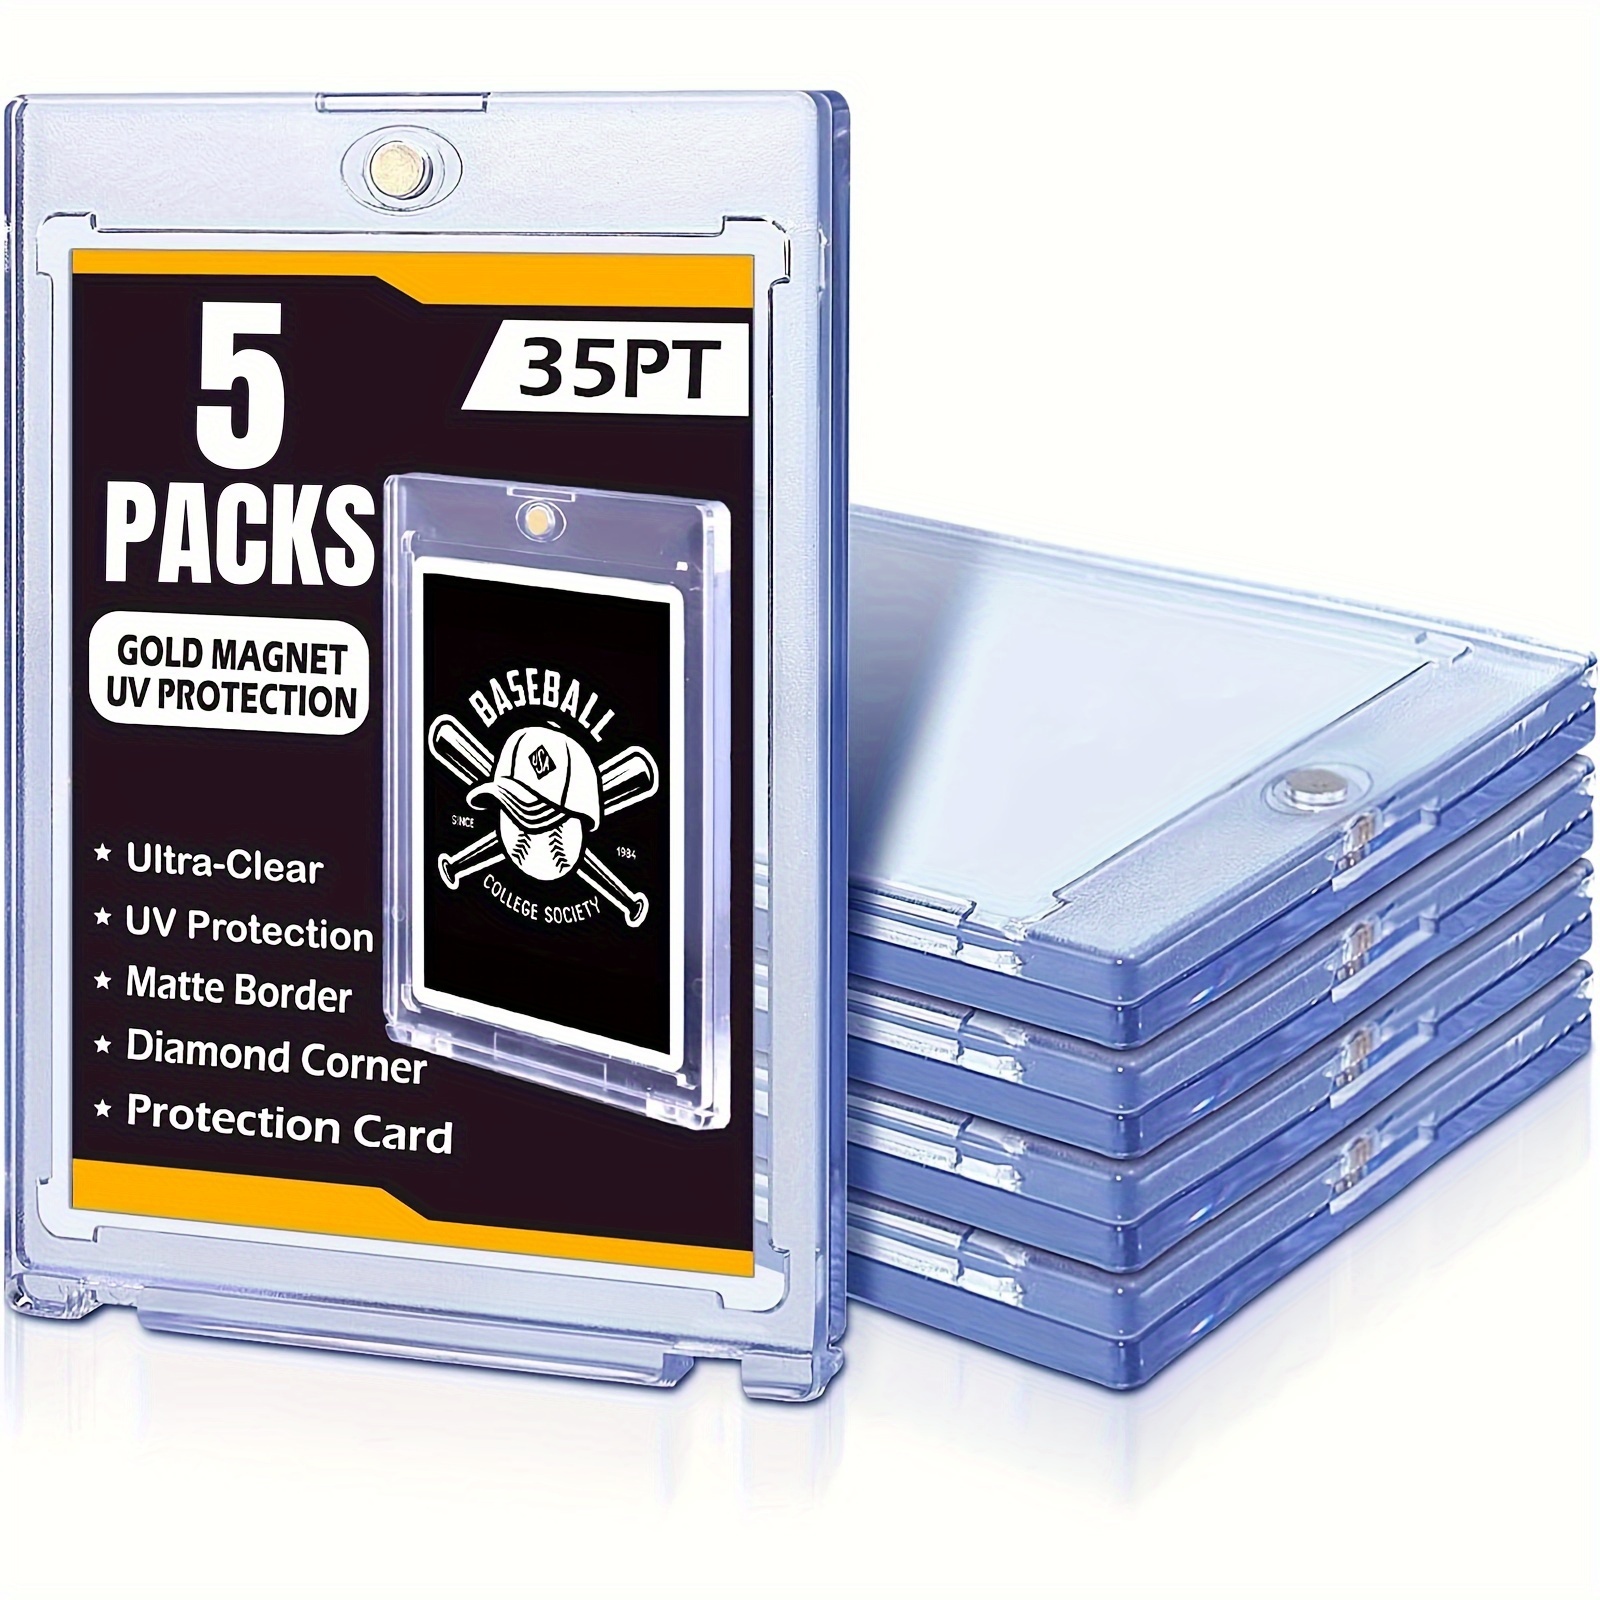 9 Pocket Card Sleeves ,Holds 7200 Cards ,Trading Card Binder Sleeves,High Quality Thickened,Card Binder Sleeves, 3 Ring 9 Pocket Pages for Sports